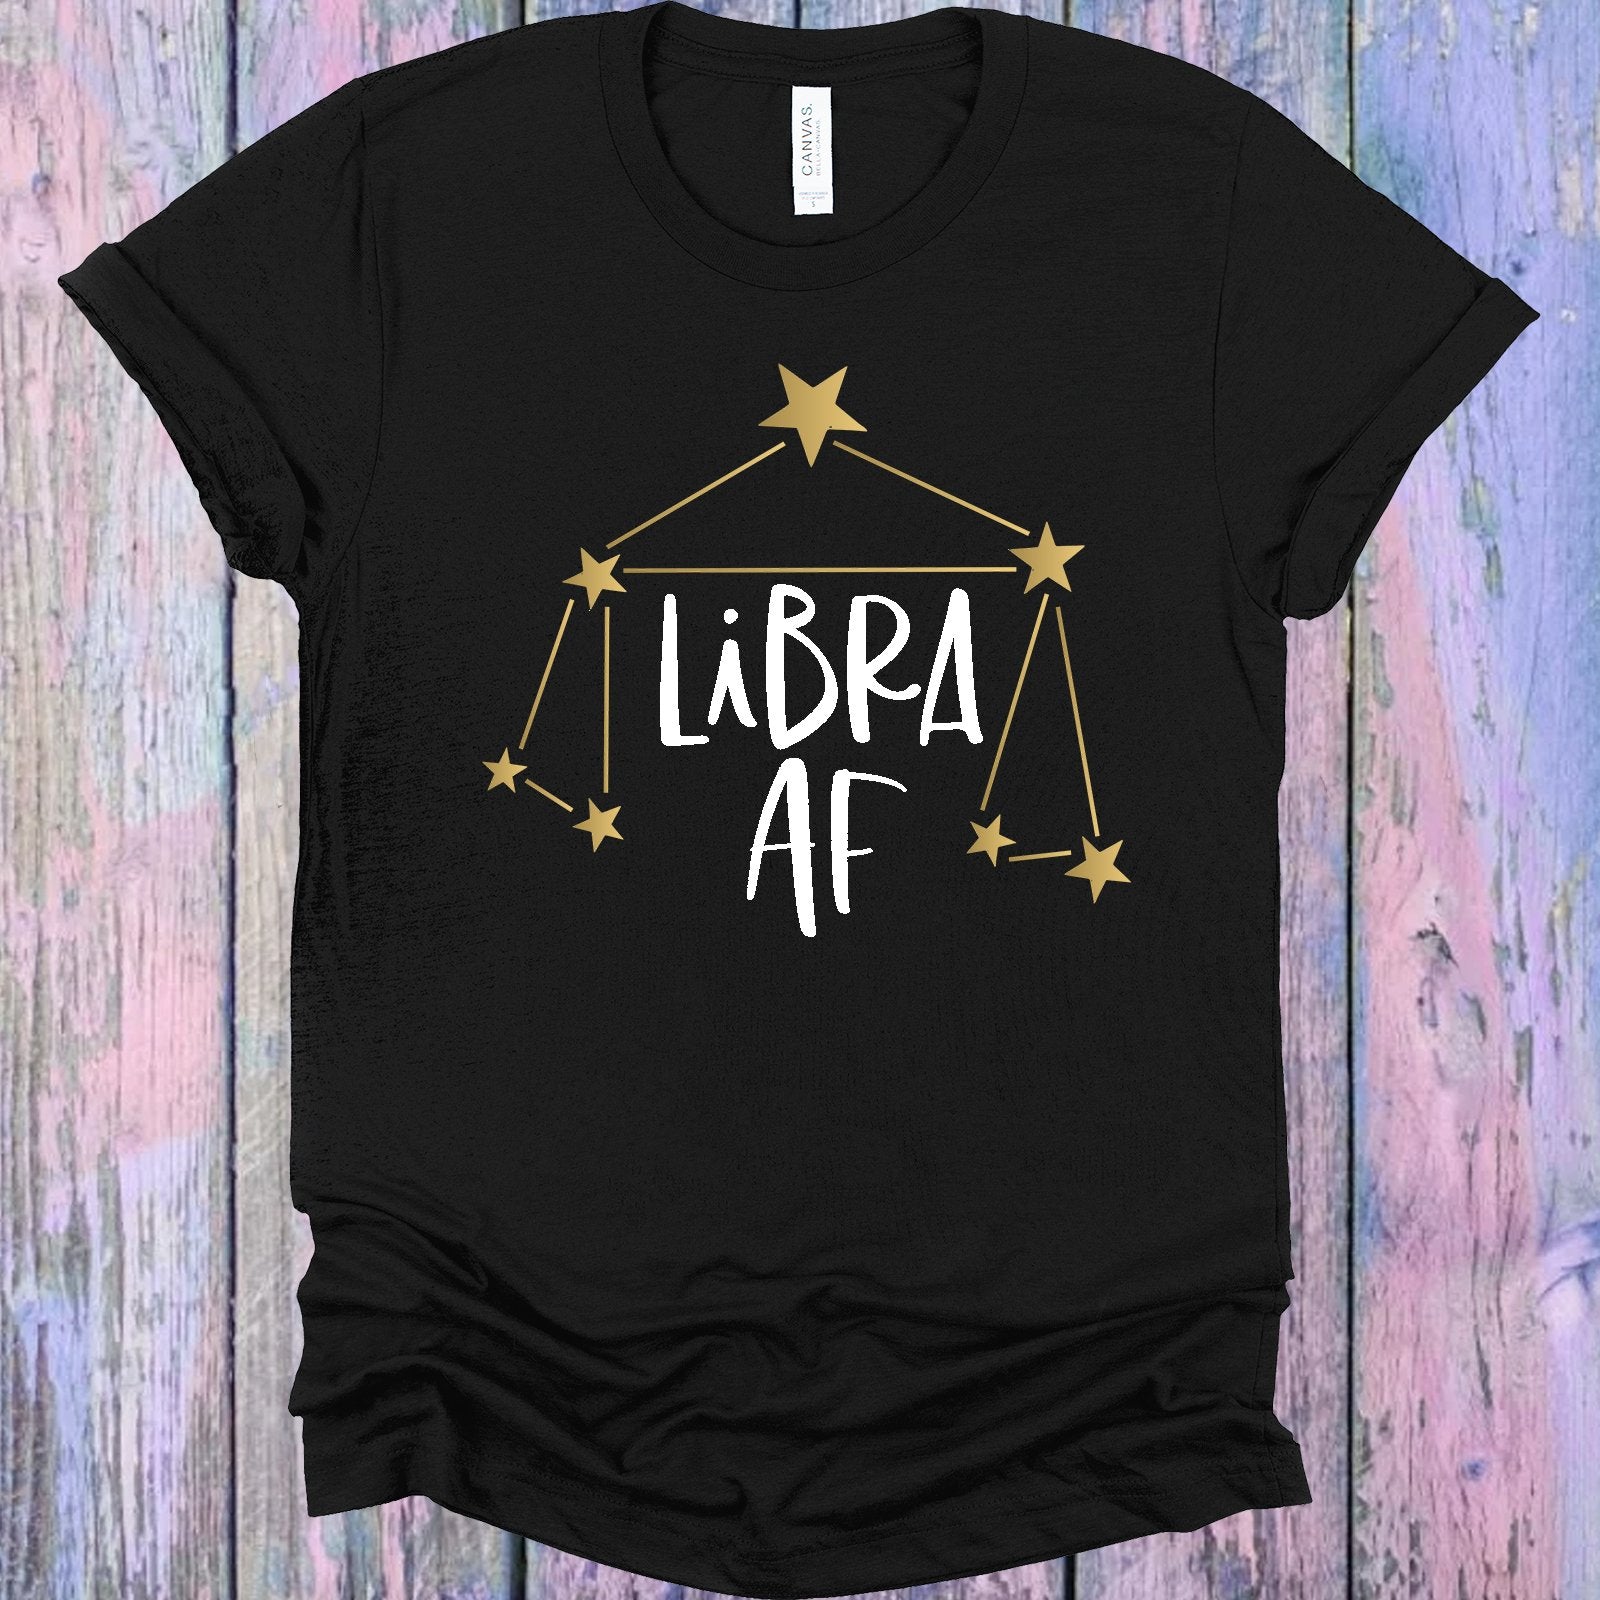 Libra Af Graphic Tee Graphic Tee